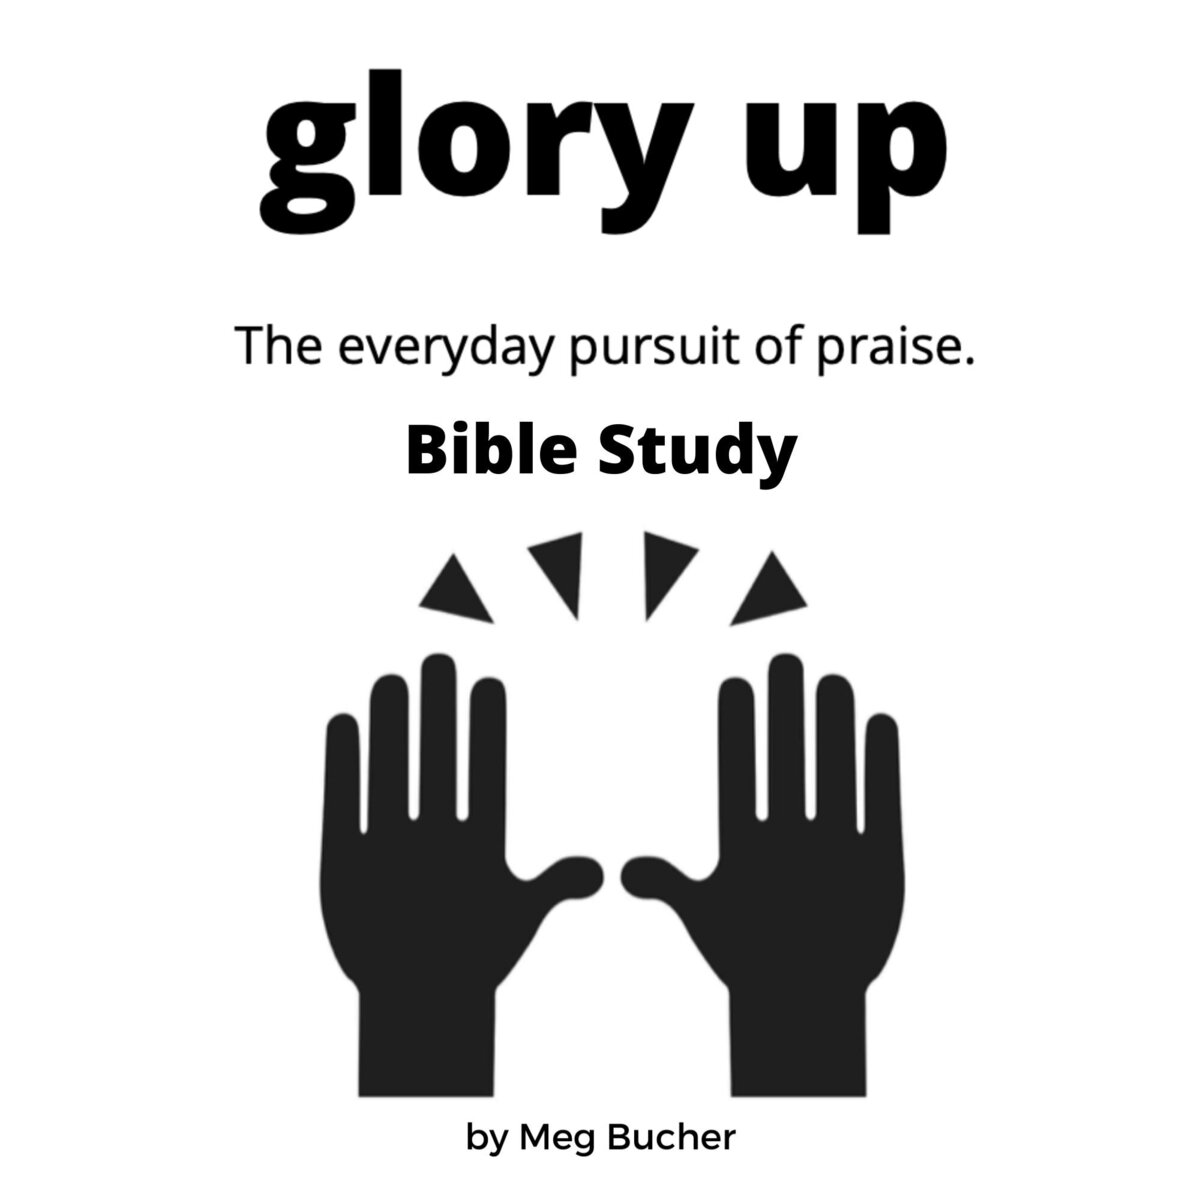 Glory Up Bible Study Book Cover (8 × 8 in)